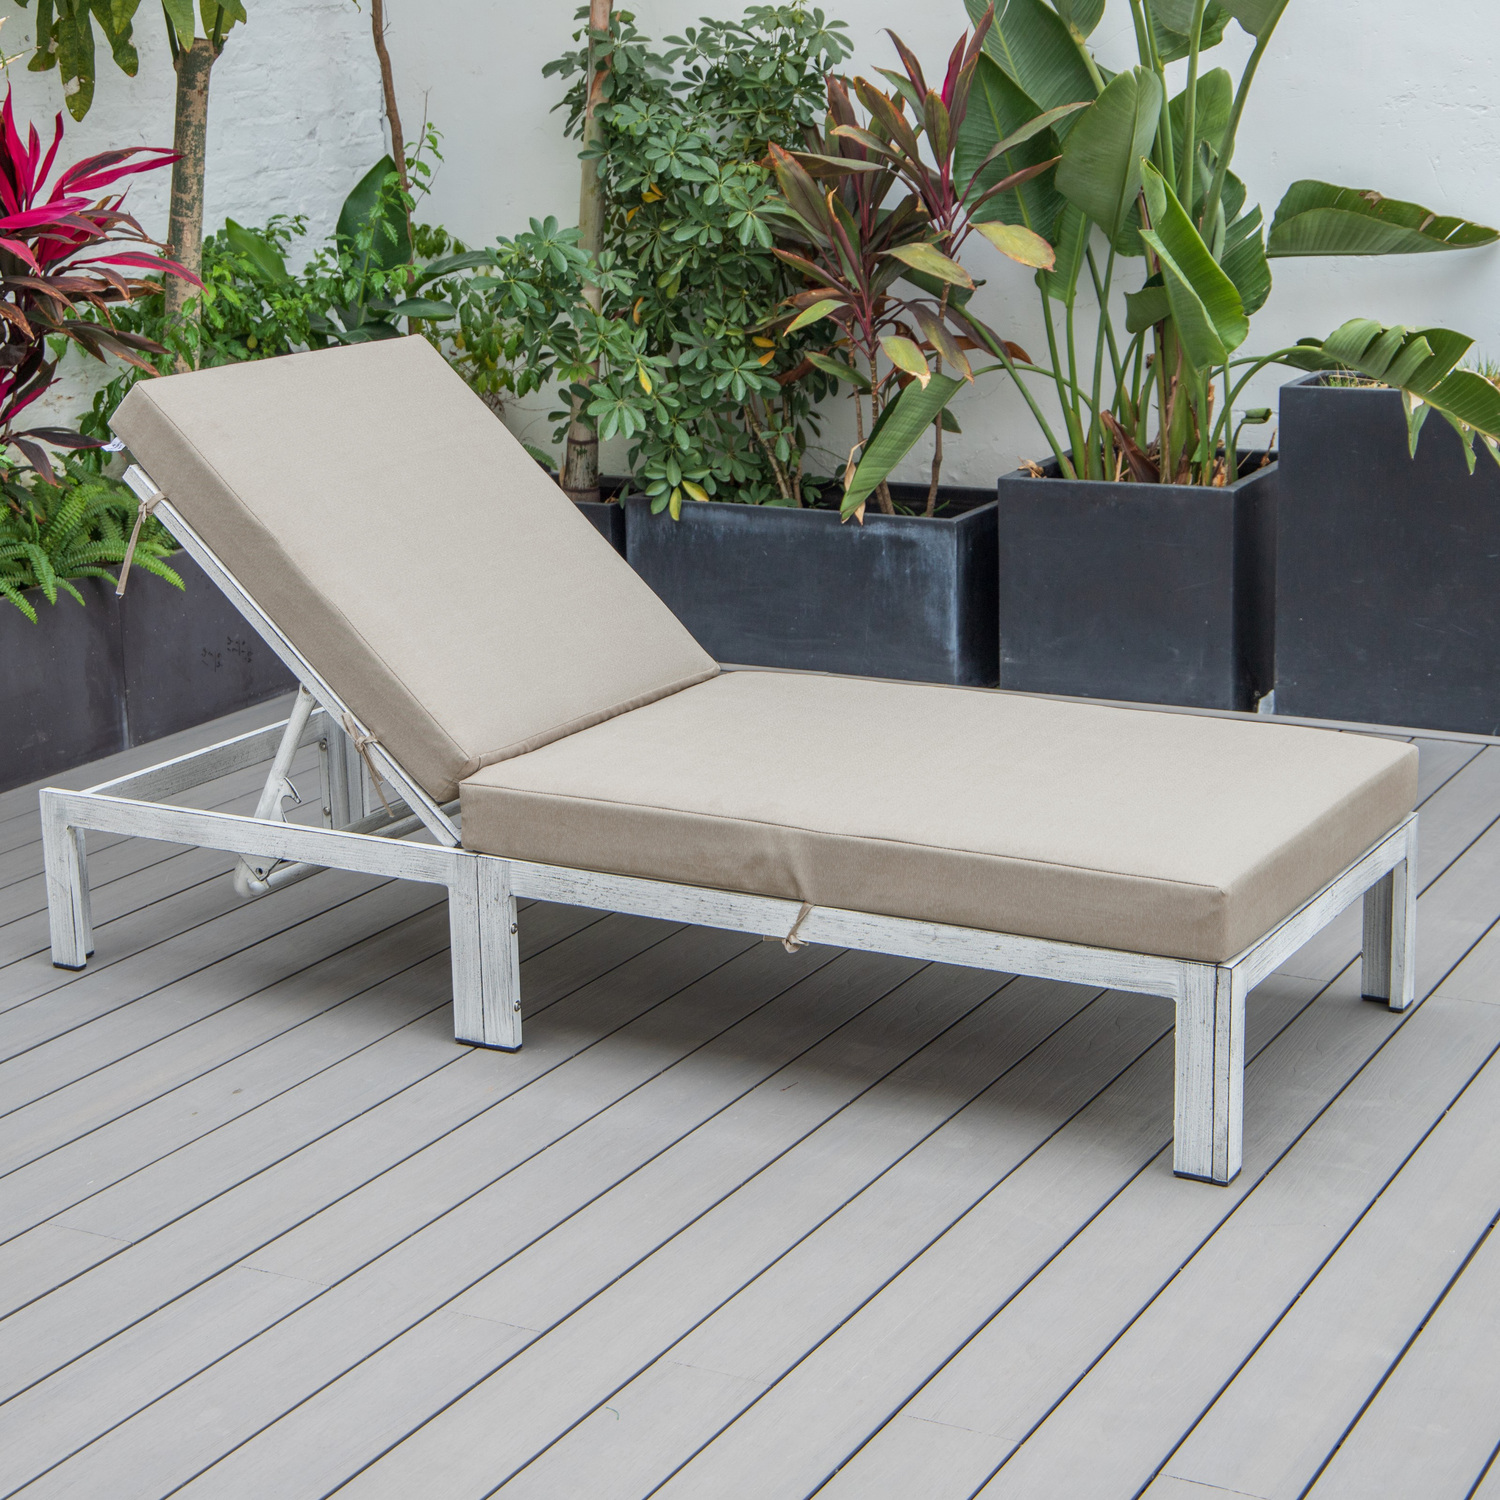 LeisureMod Chelsea Modern Weathered Grey Aluminum Outdoor Patio Chaise Lounge Chair Set of 2 With Orange Cushions - image 2 of 5